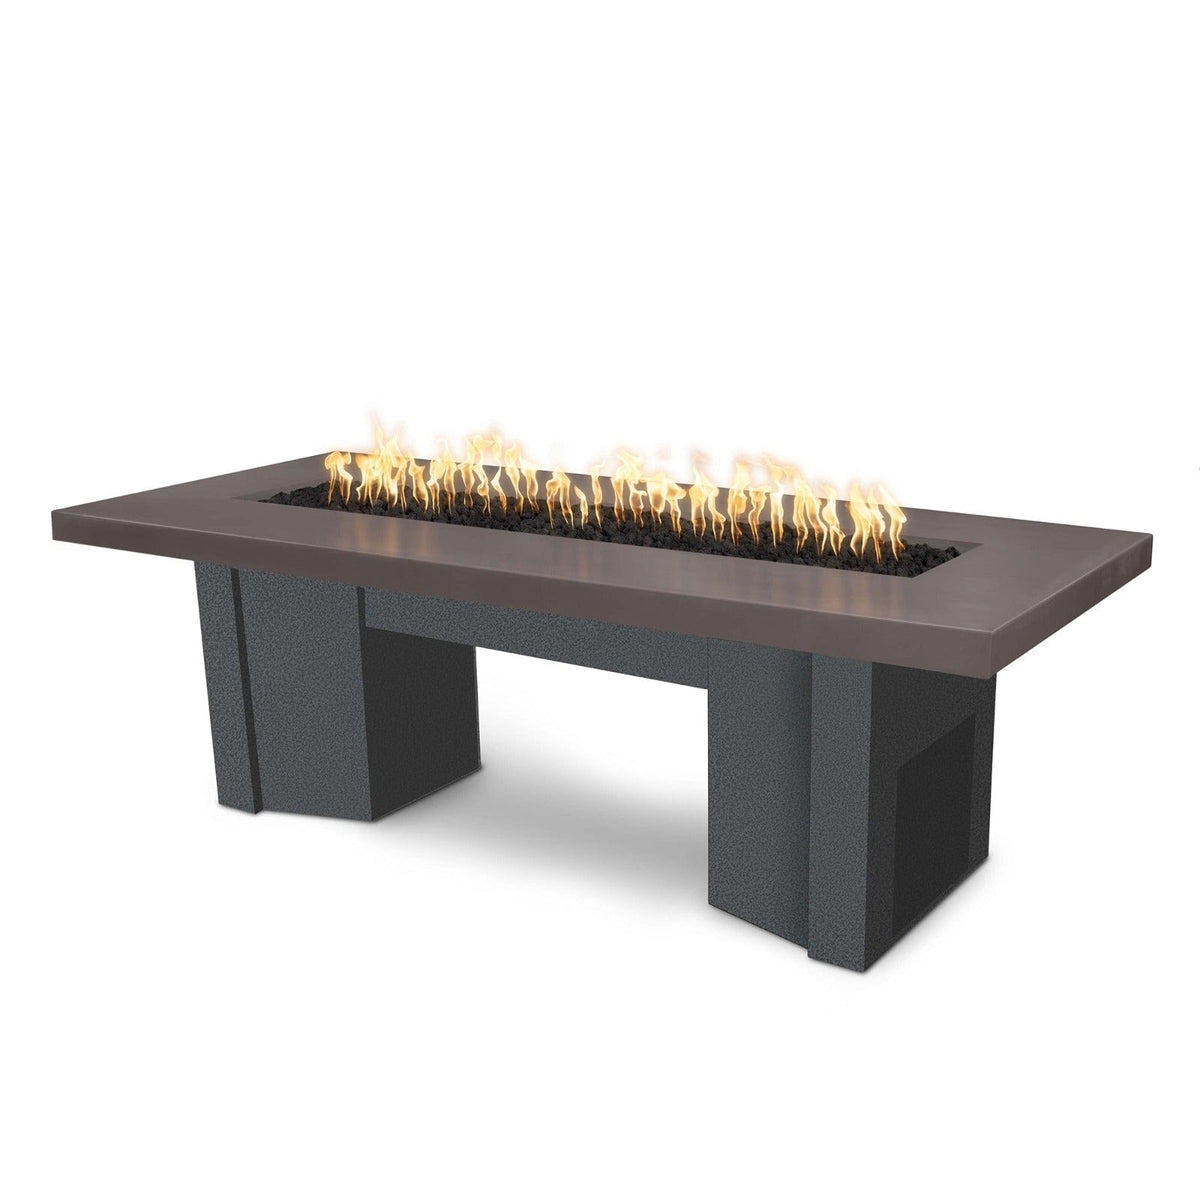 The Outdoor Plus Fire Features Chestnut (-CST) / Silver Vein Powder Coated Steel (-SLV) The Outdoor Plus 60&quot; Alameda Fire Table Smooth Concrete in Liquid Propane - Flame Sense System with Push Button Spark Igniter / OPT-ALMGFRC60FSEN-LP